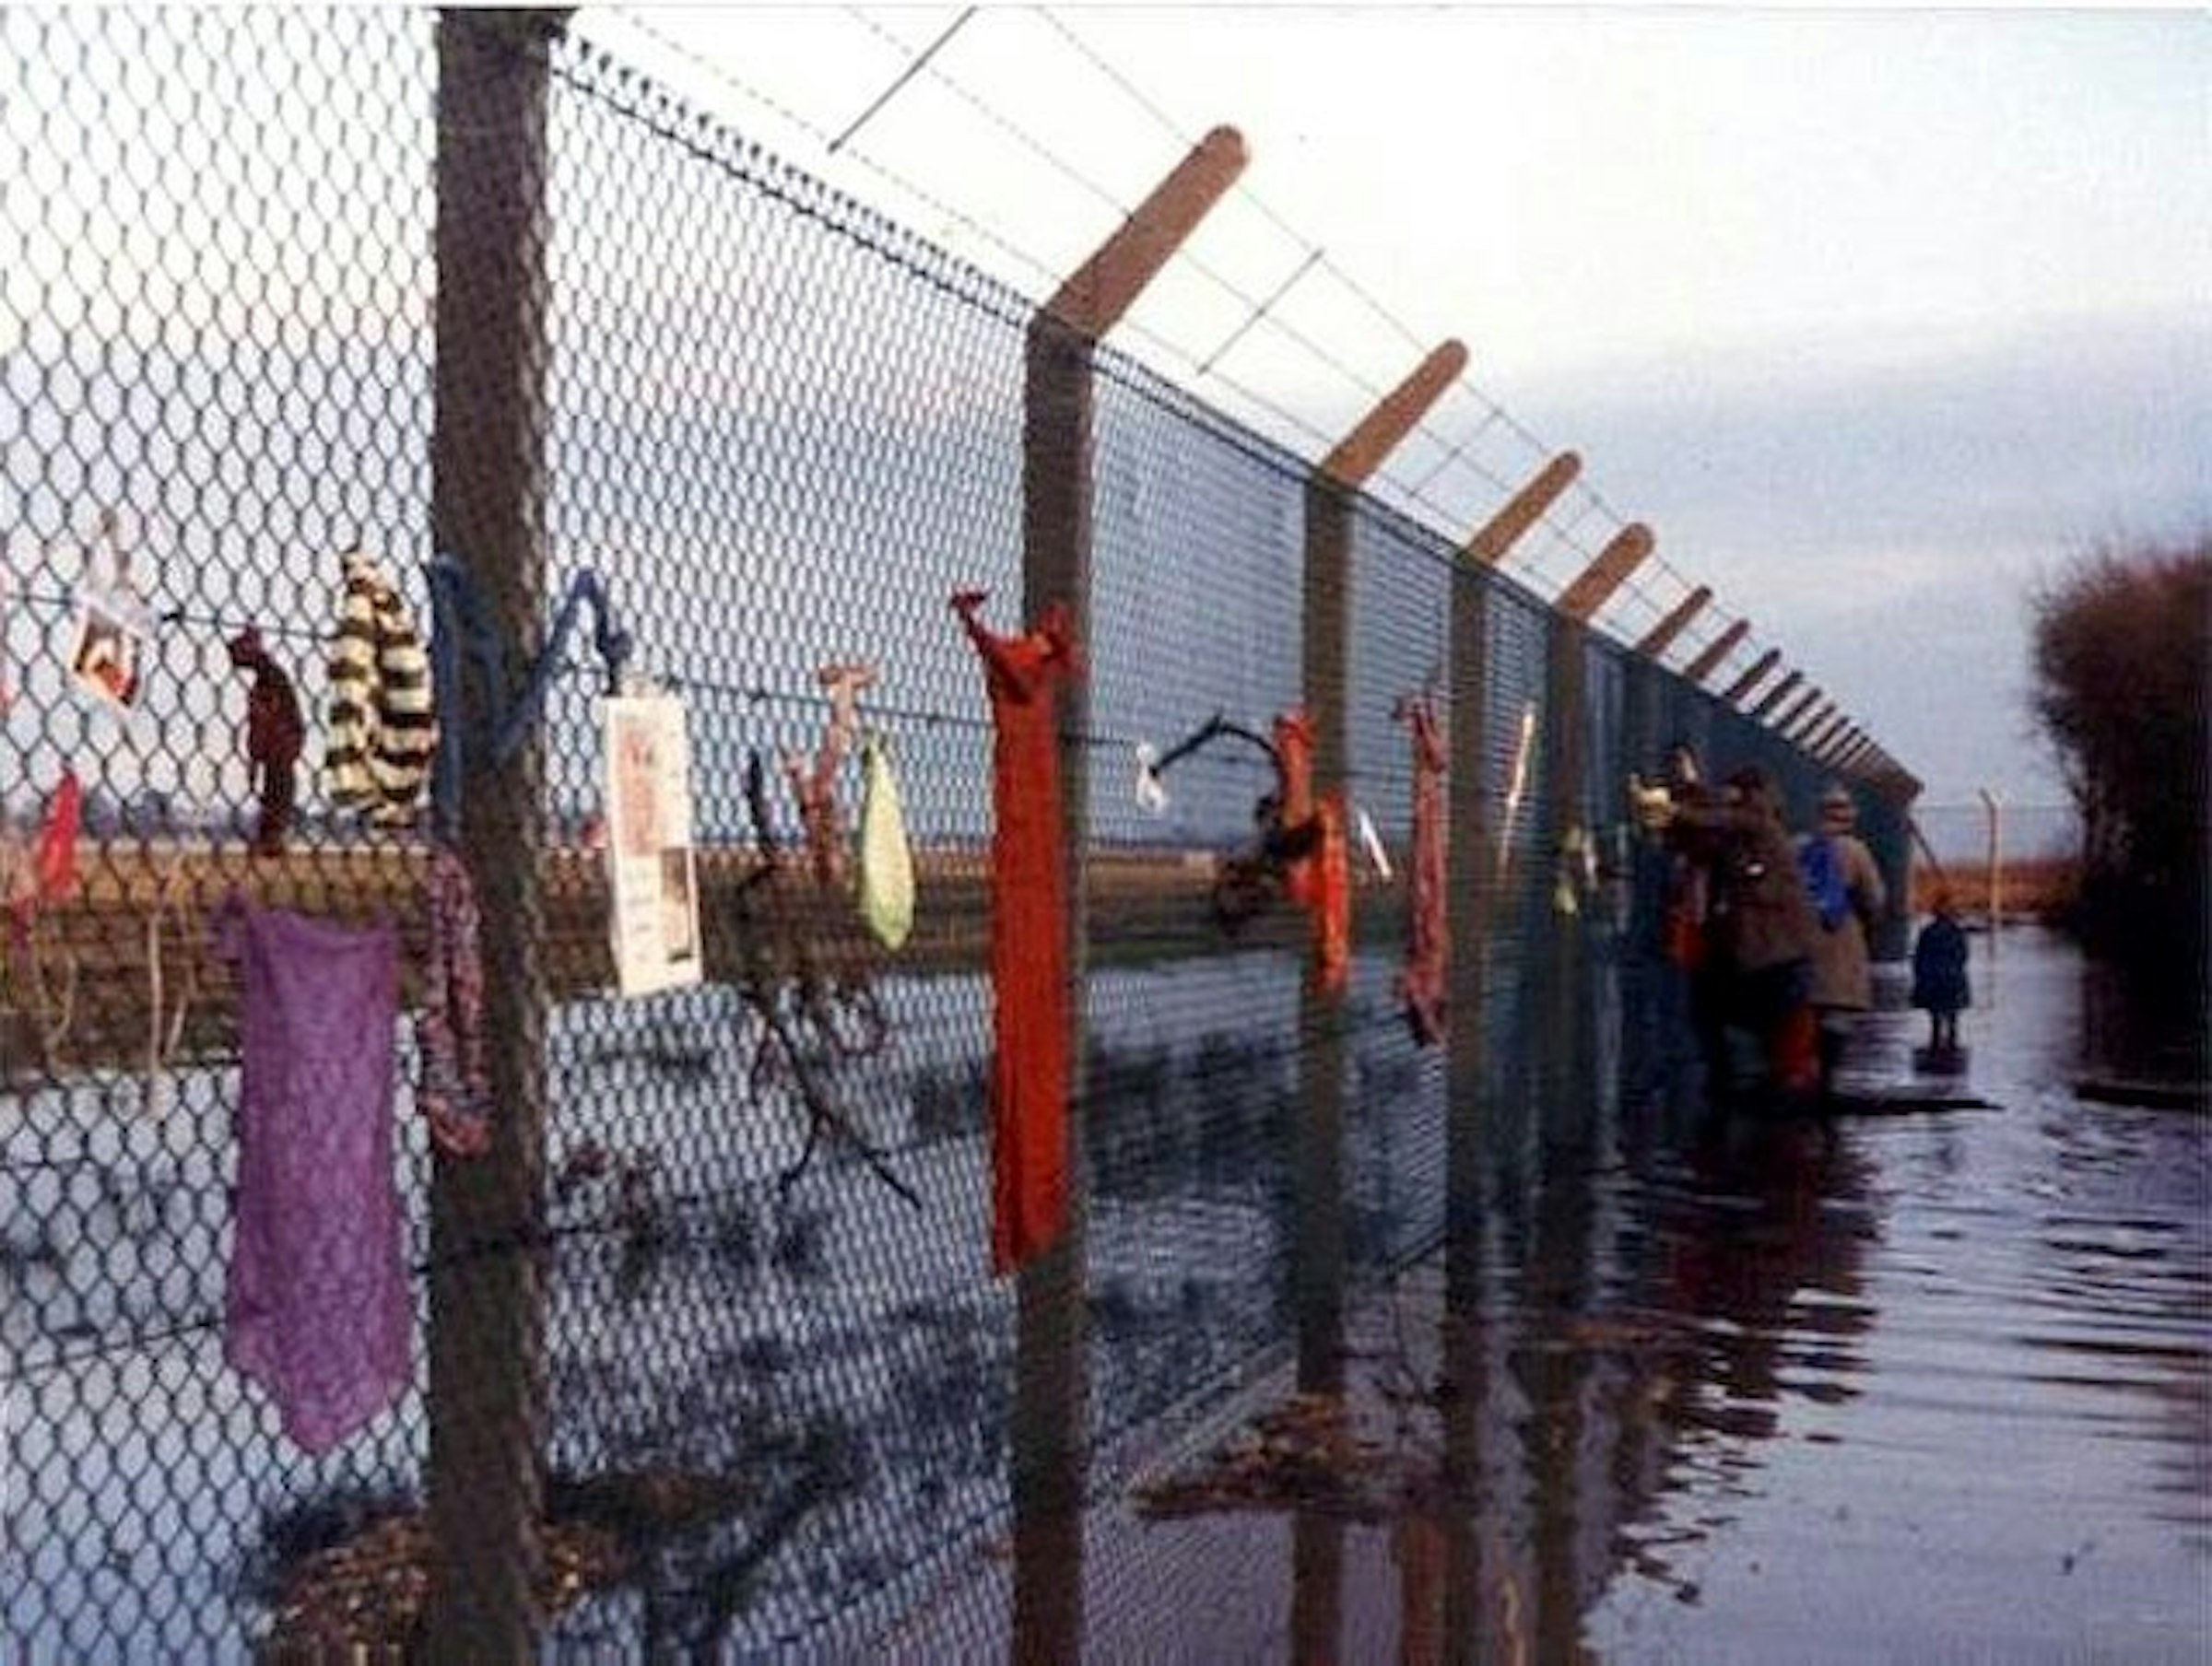 ceridwen / Greenham Common women's protest 1982, decorating the fence / CC BY-SA 2.0